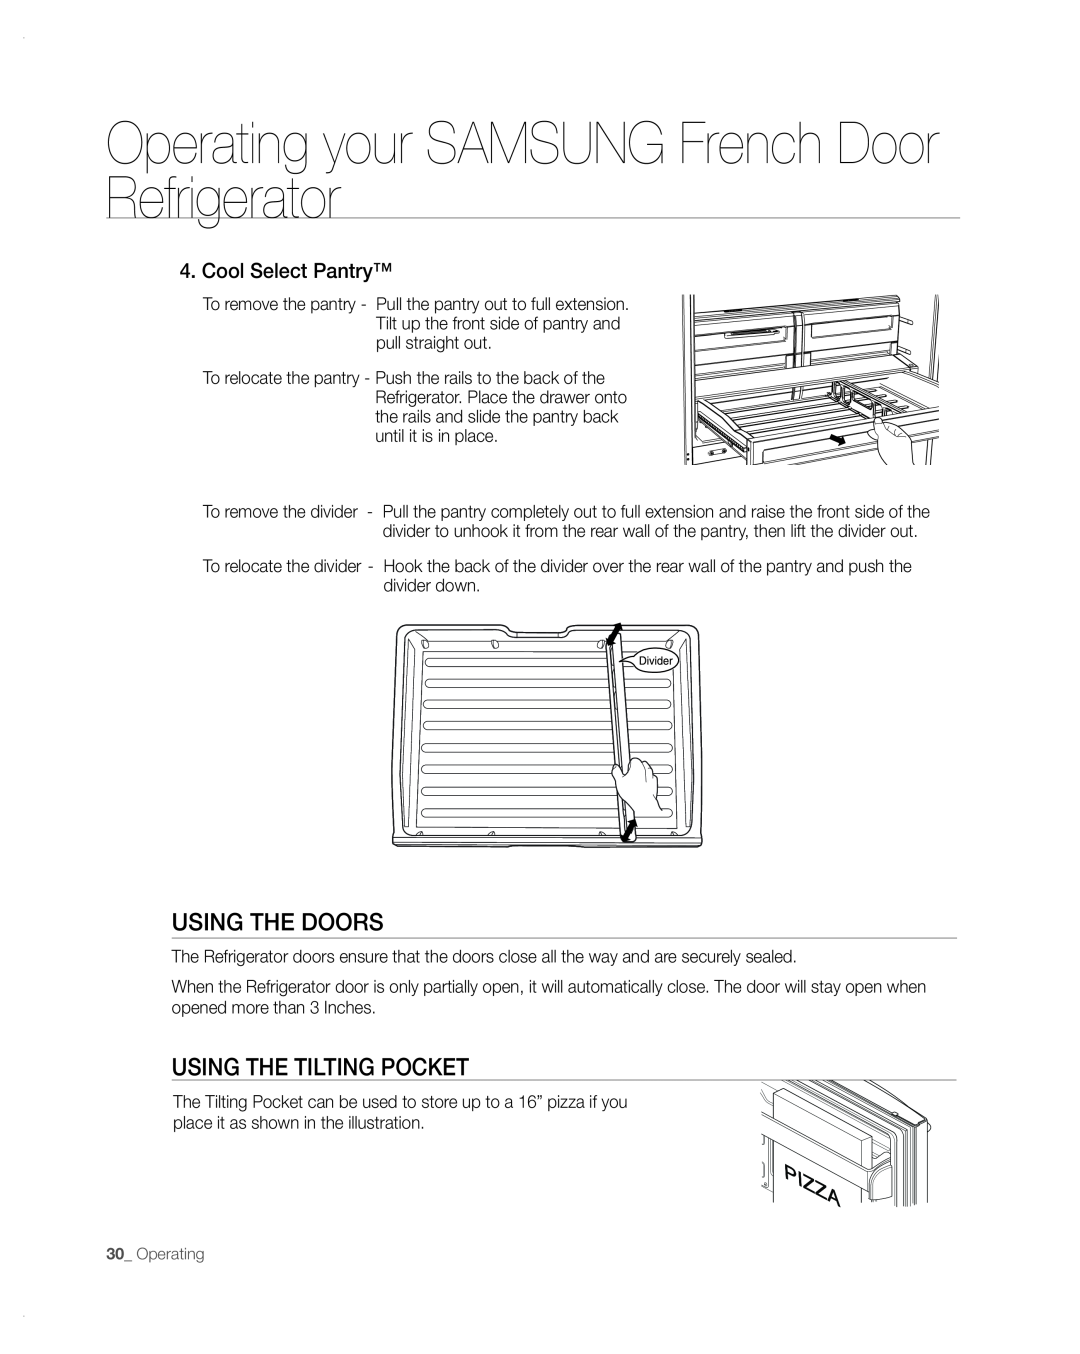 Samsung RFG297AA user manual using tHe DooRs, usinG tHE tiLtinG PoCKEt, Operating your SAMSUNG French Door Refrigerator 